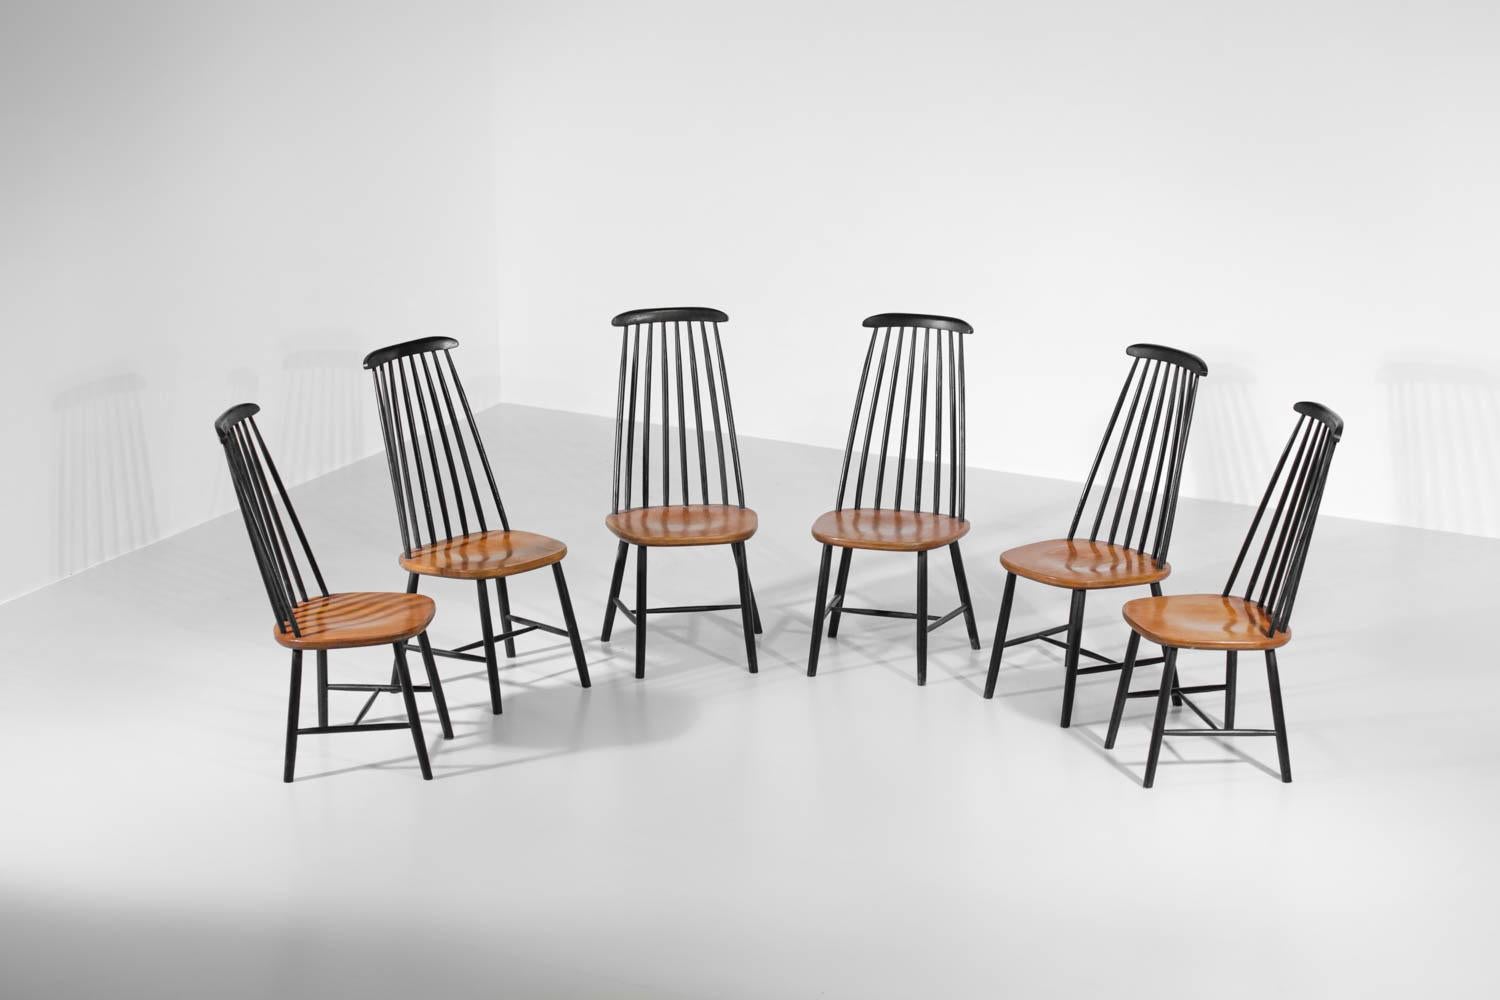 Set of 6 Scandinavian vintage chairs by Finnish designer Ilmari Tapiovaara dating from the 60s. Beechwood structure, backs and seats have been painted black (original paint). Very nice vintage condition of this lot, note slight traces of use and